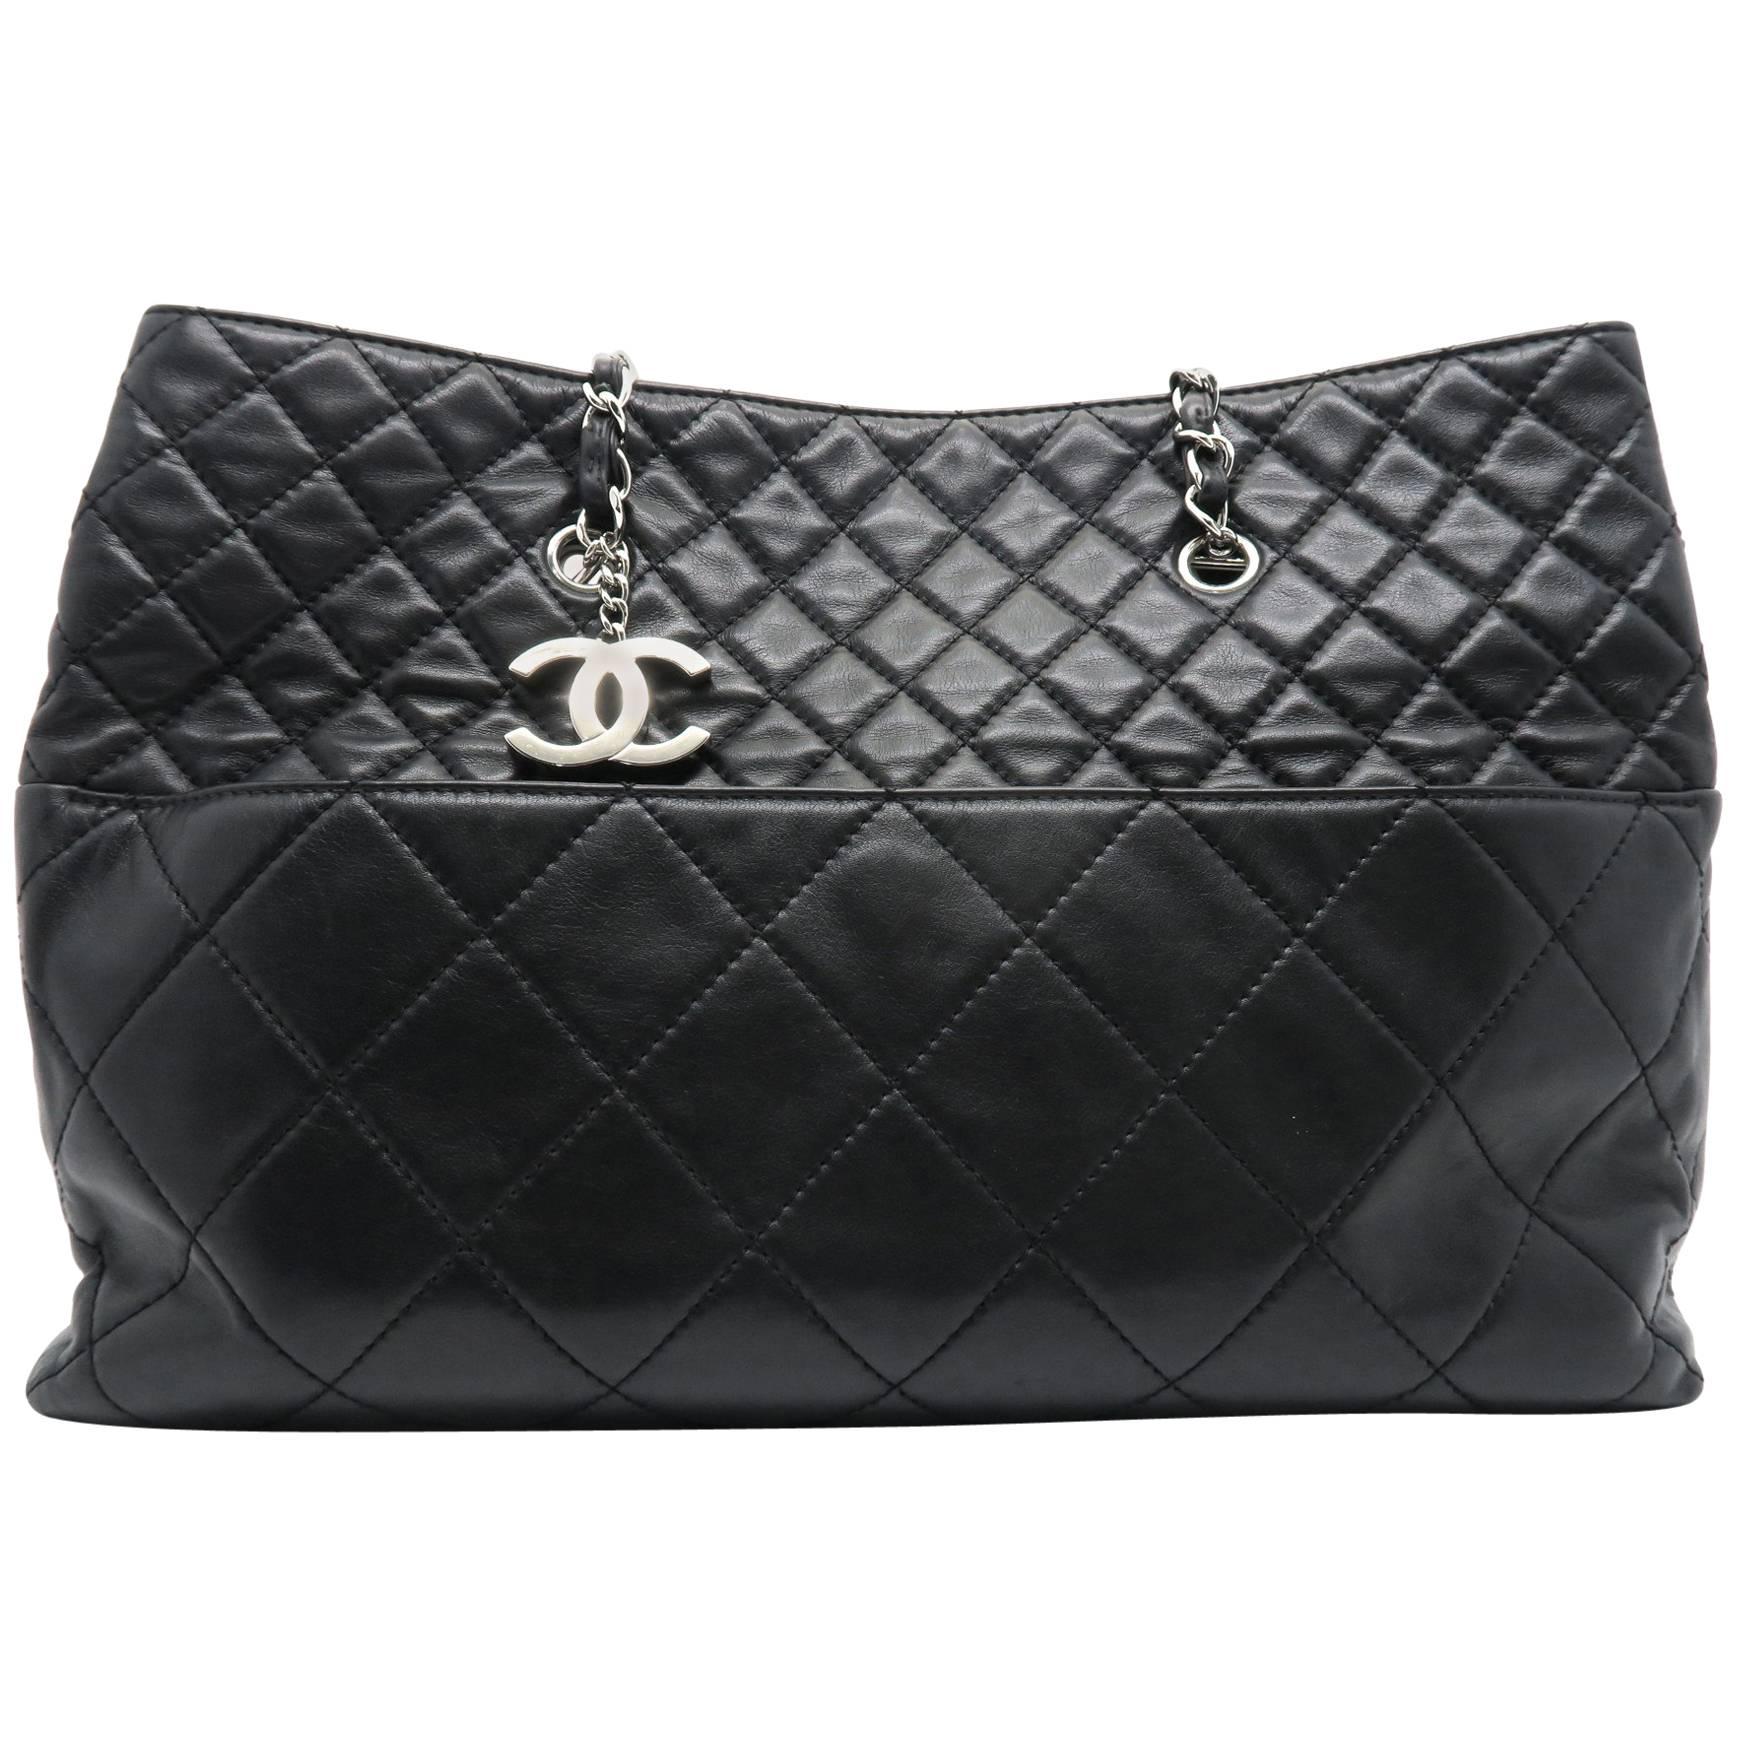 Chanel Black Quilted Lambskin Leather Silver Metal Chain Tote Bag